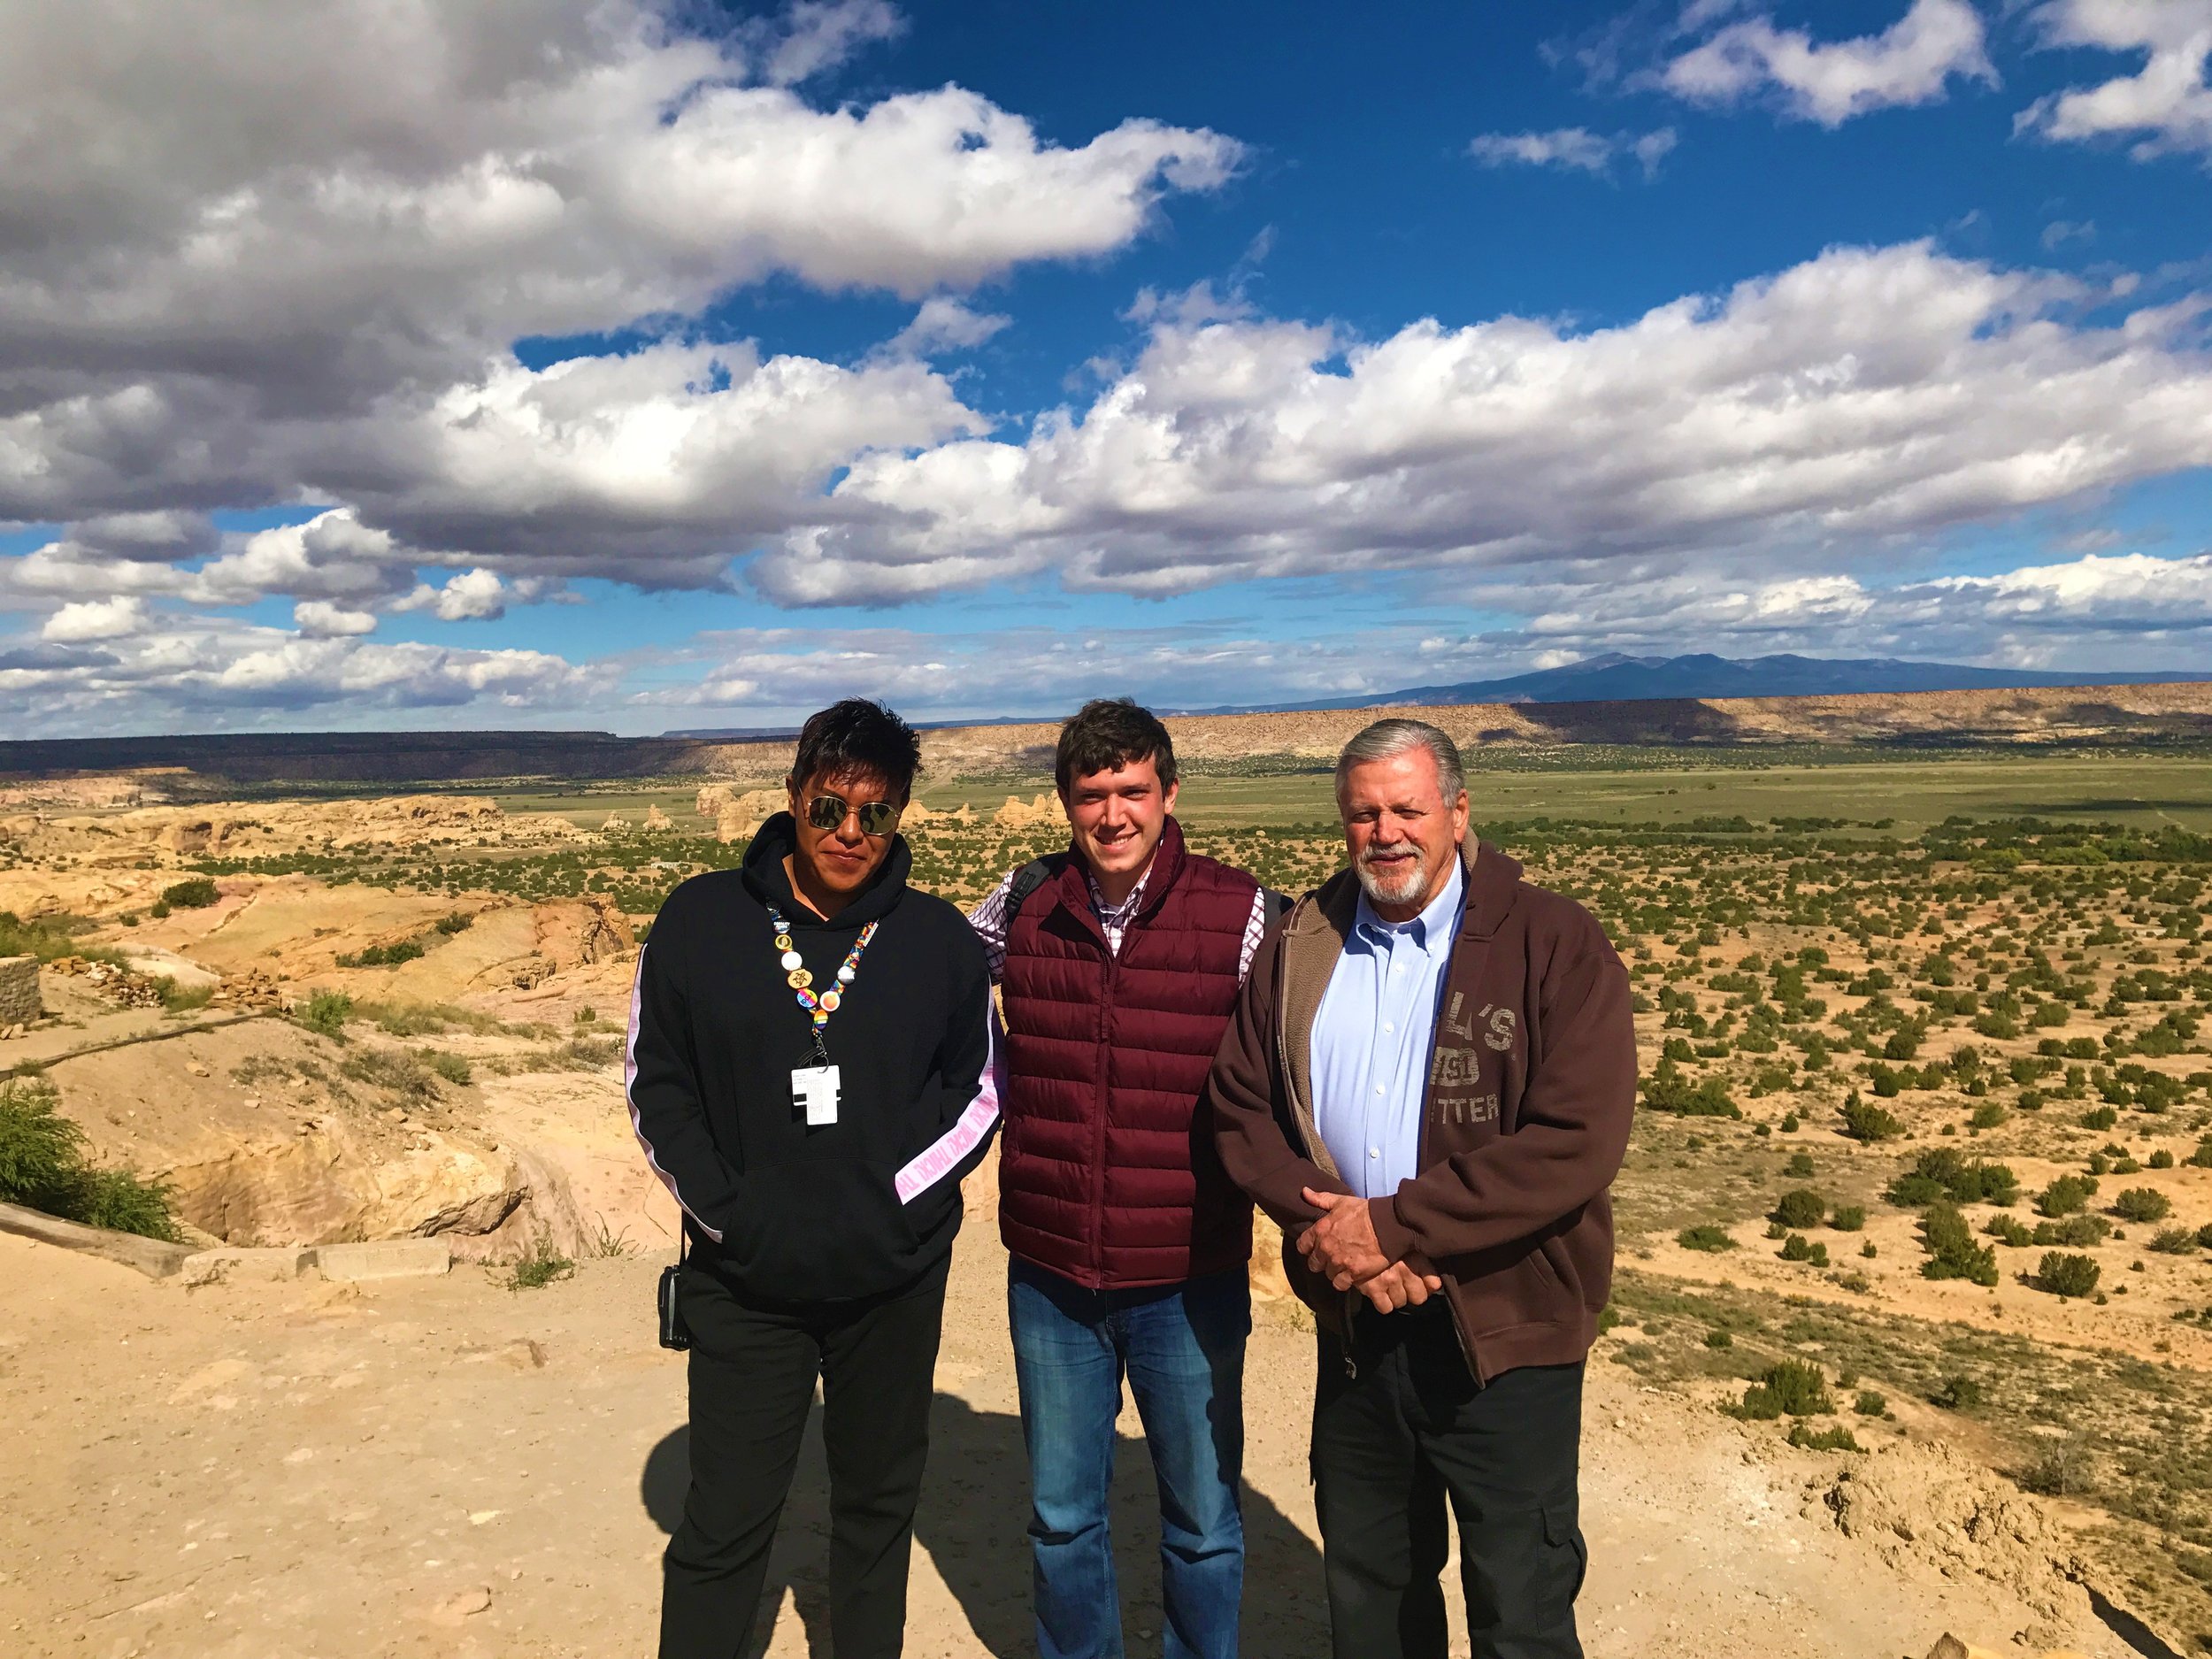 Pictured Left to Right: Acoma Local Guide, Tour Director - JD, Motorcoach Operator - Lyn